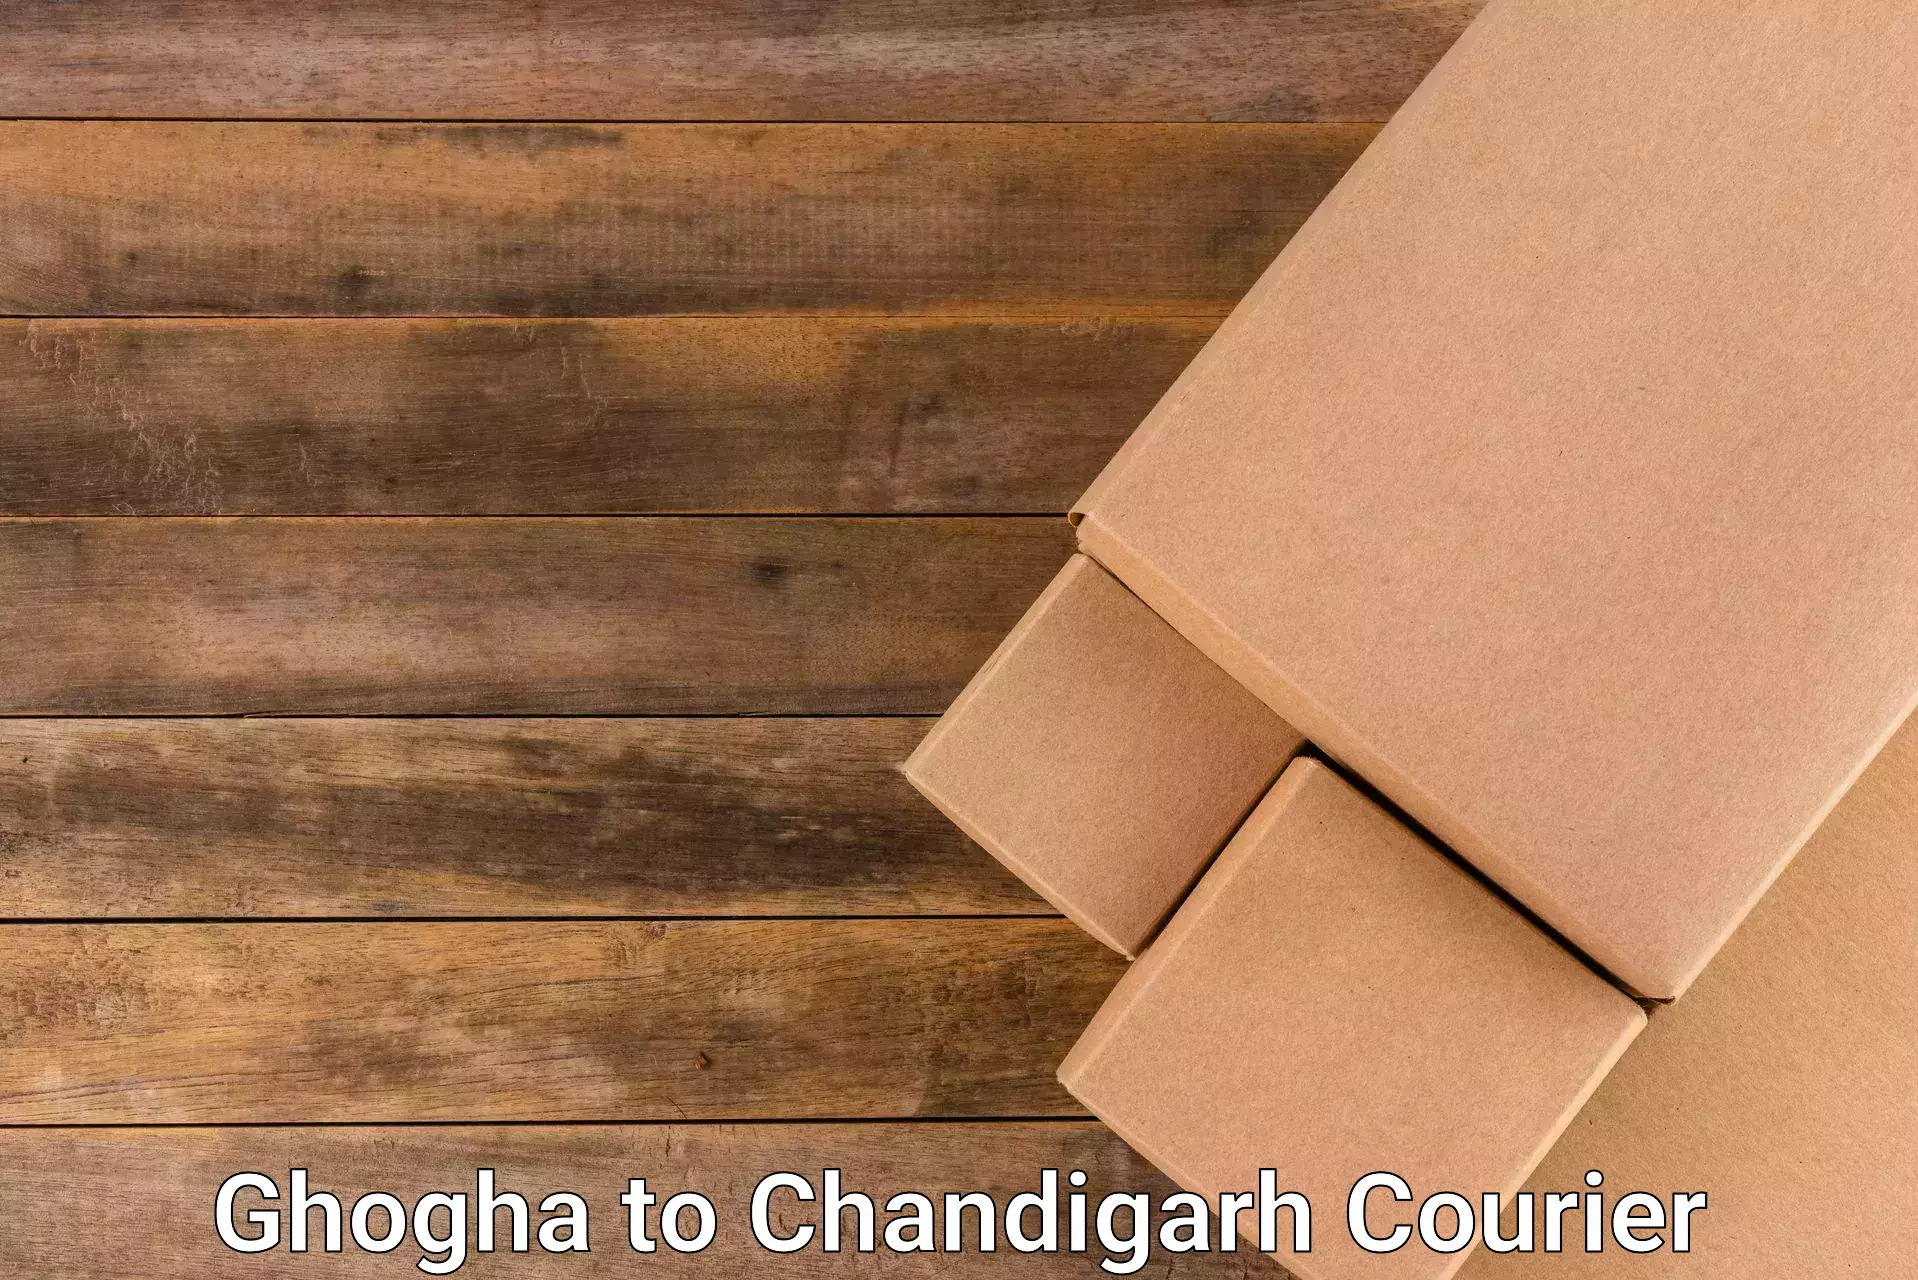 24/7 courier service Ghogha to Chandigarh